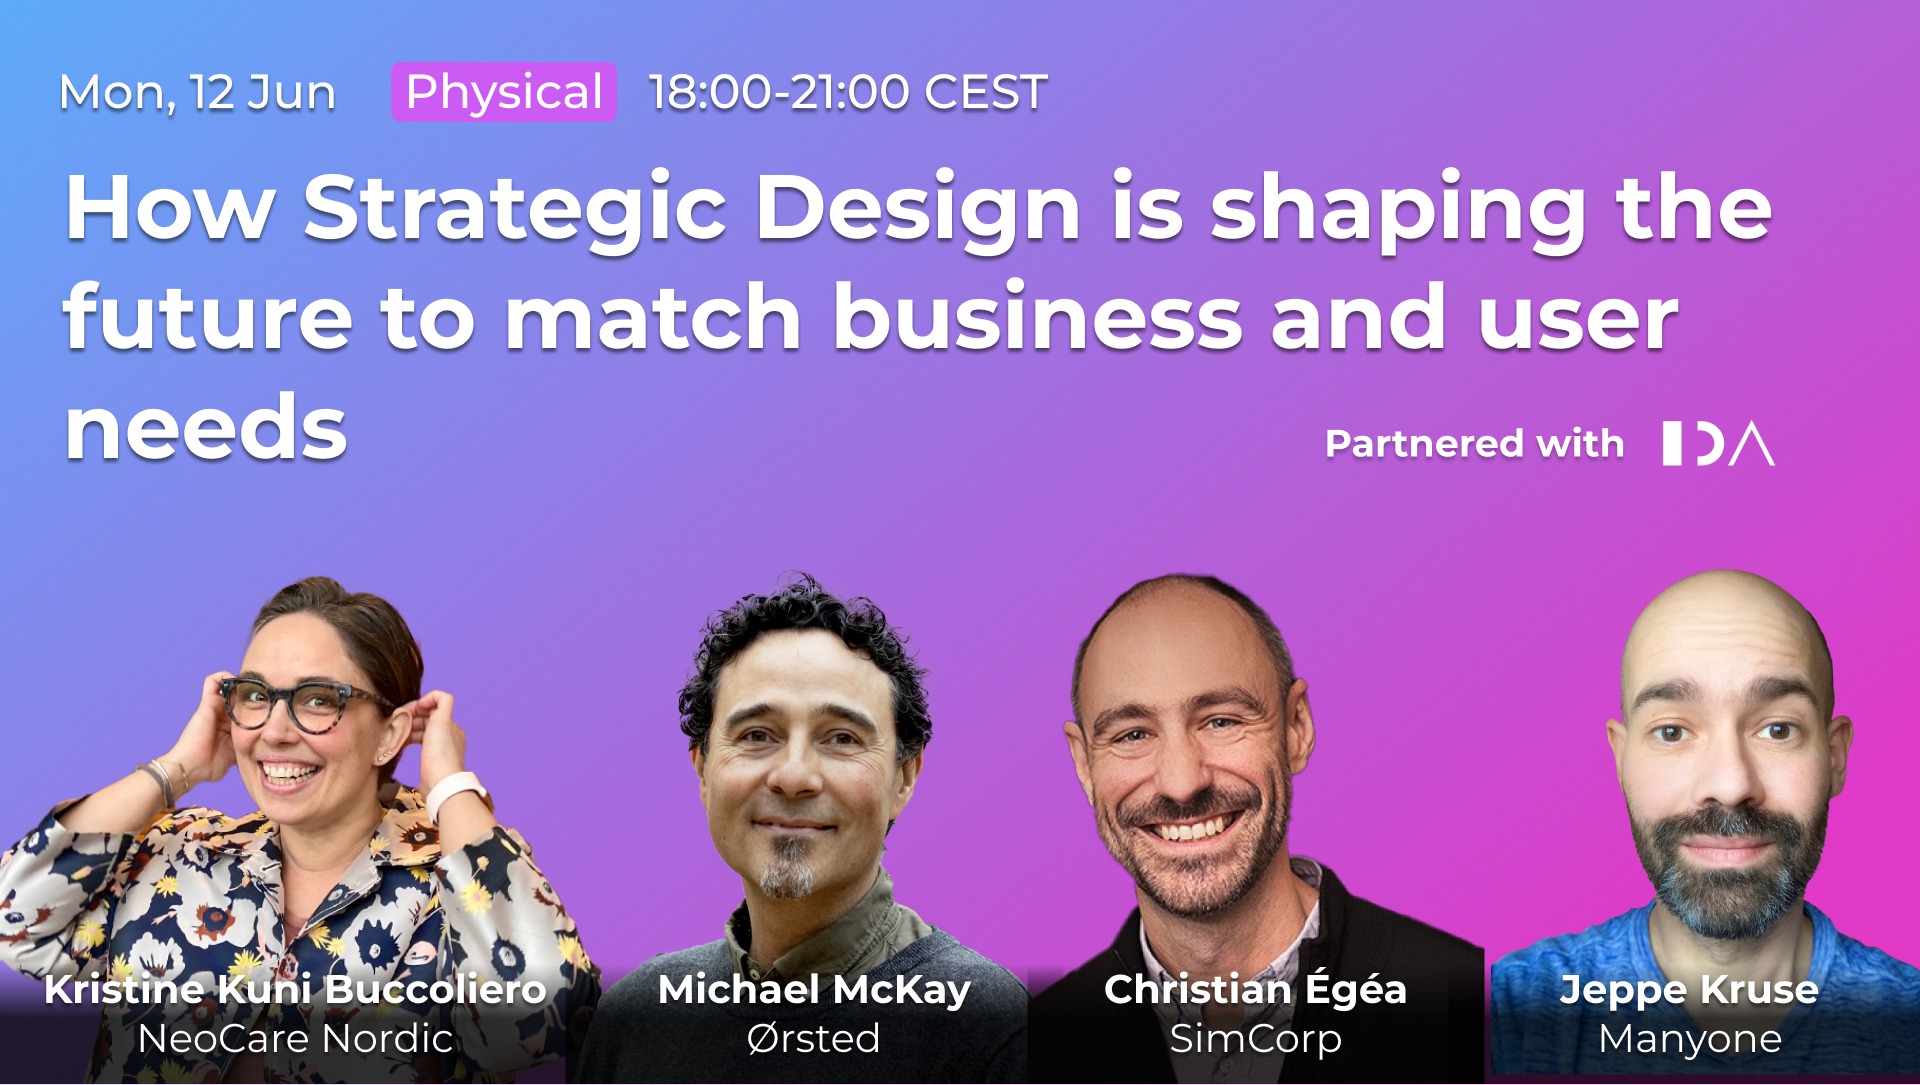 How Strategic Design is shaping the future to match business and user needs